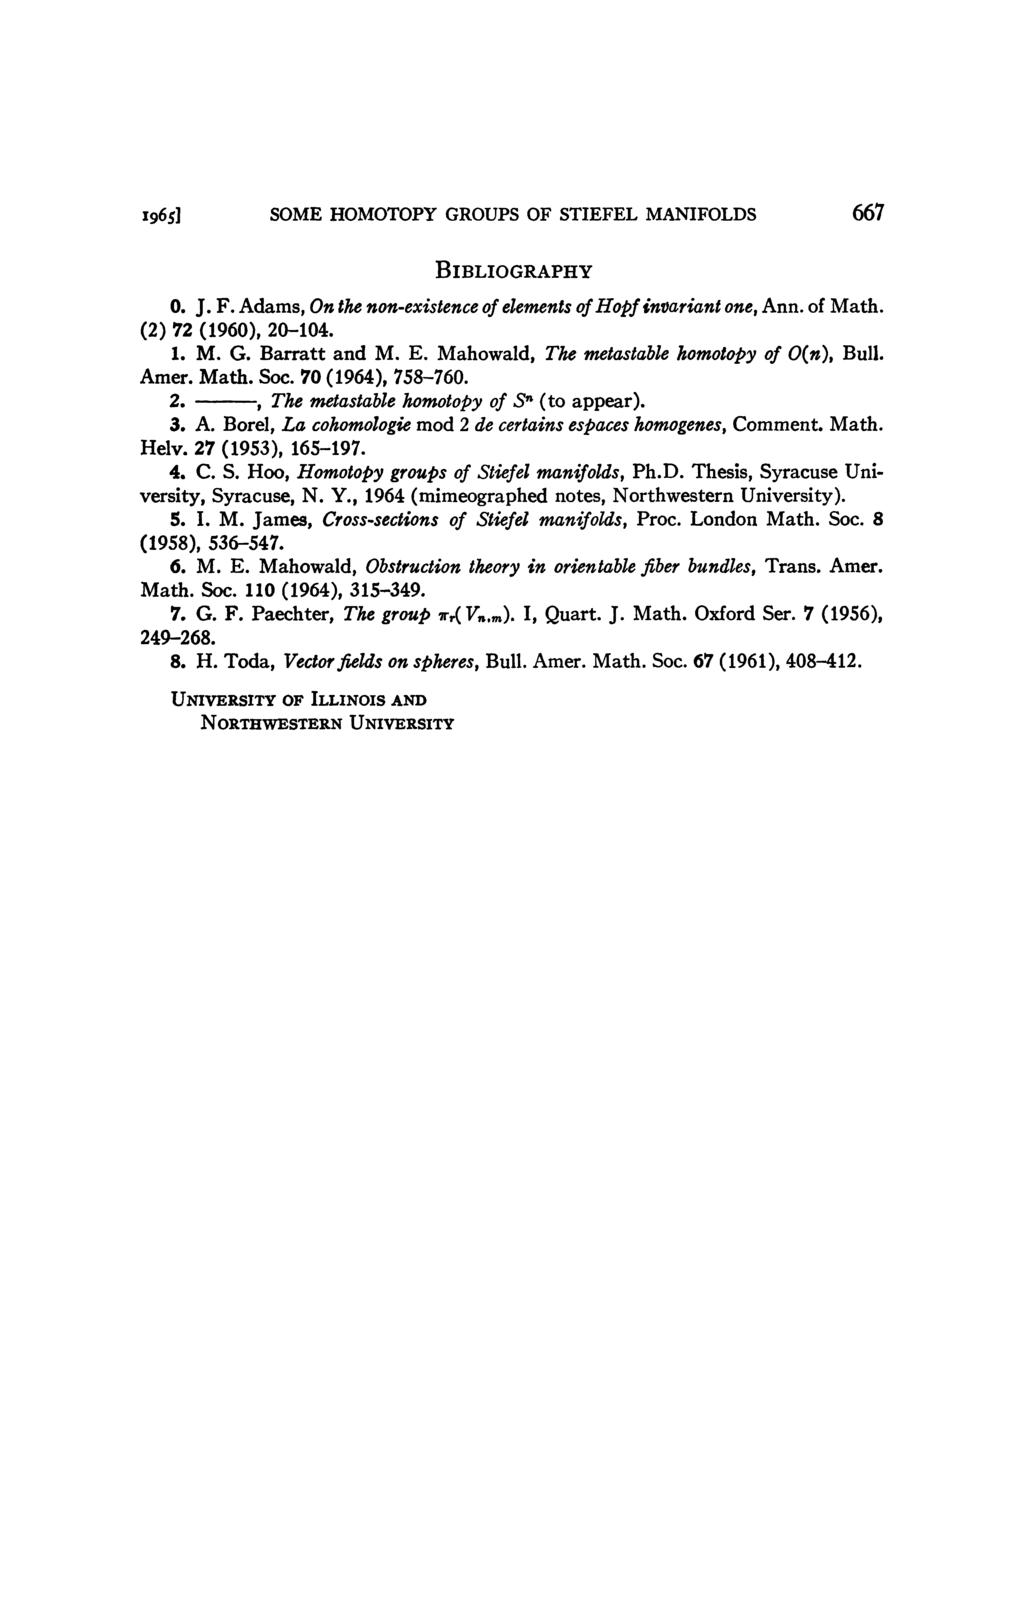 1965] SME HMTPY GRUPS F STIEFEL MAIFLDS 667 BIBLIGRAPHY. J. F. Adas, n the non-existence of eleents of Hopf invariant one, Ann. of Math. () 7 (196), -1. 1. M. G. Barratt and M. E.